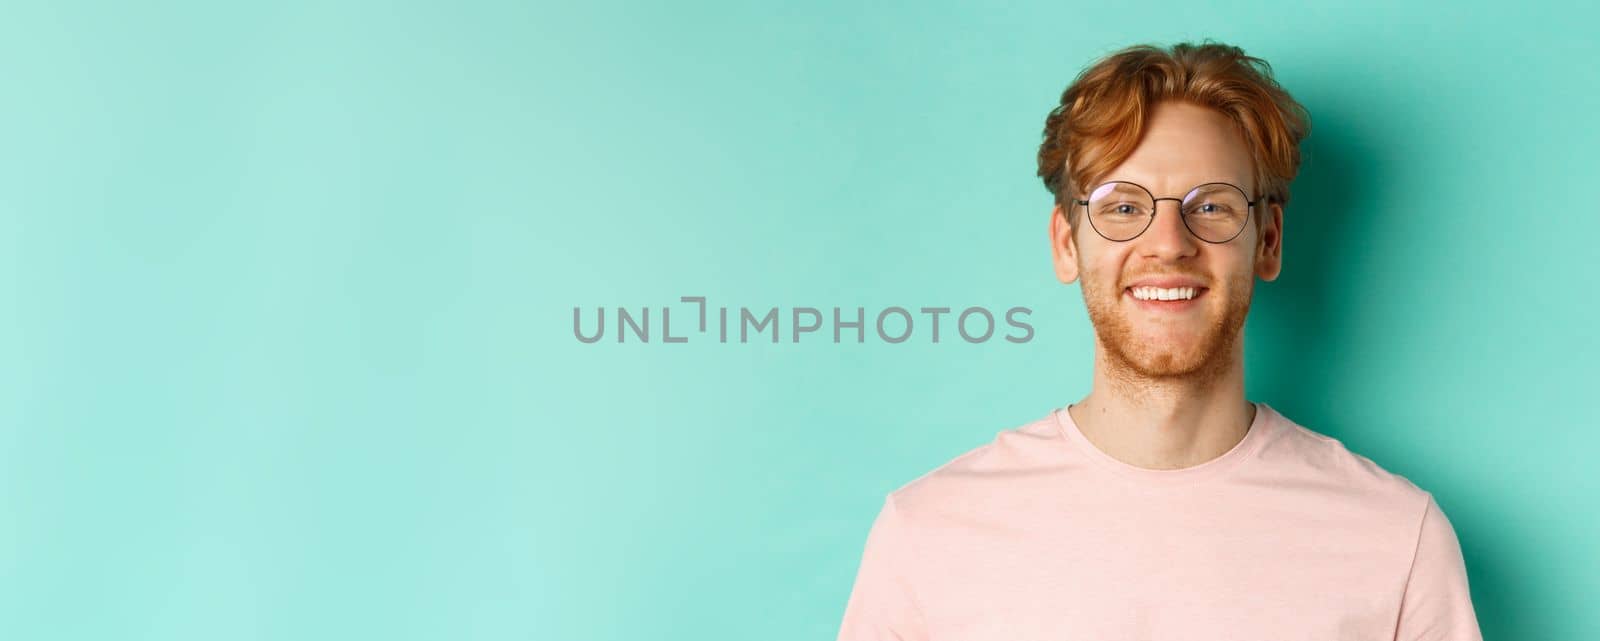 Close up of handsome redhead man in glasses looking at camera, smiling with white teeth, standing against mint background.